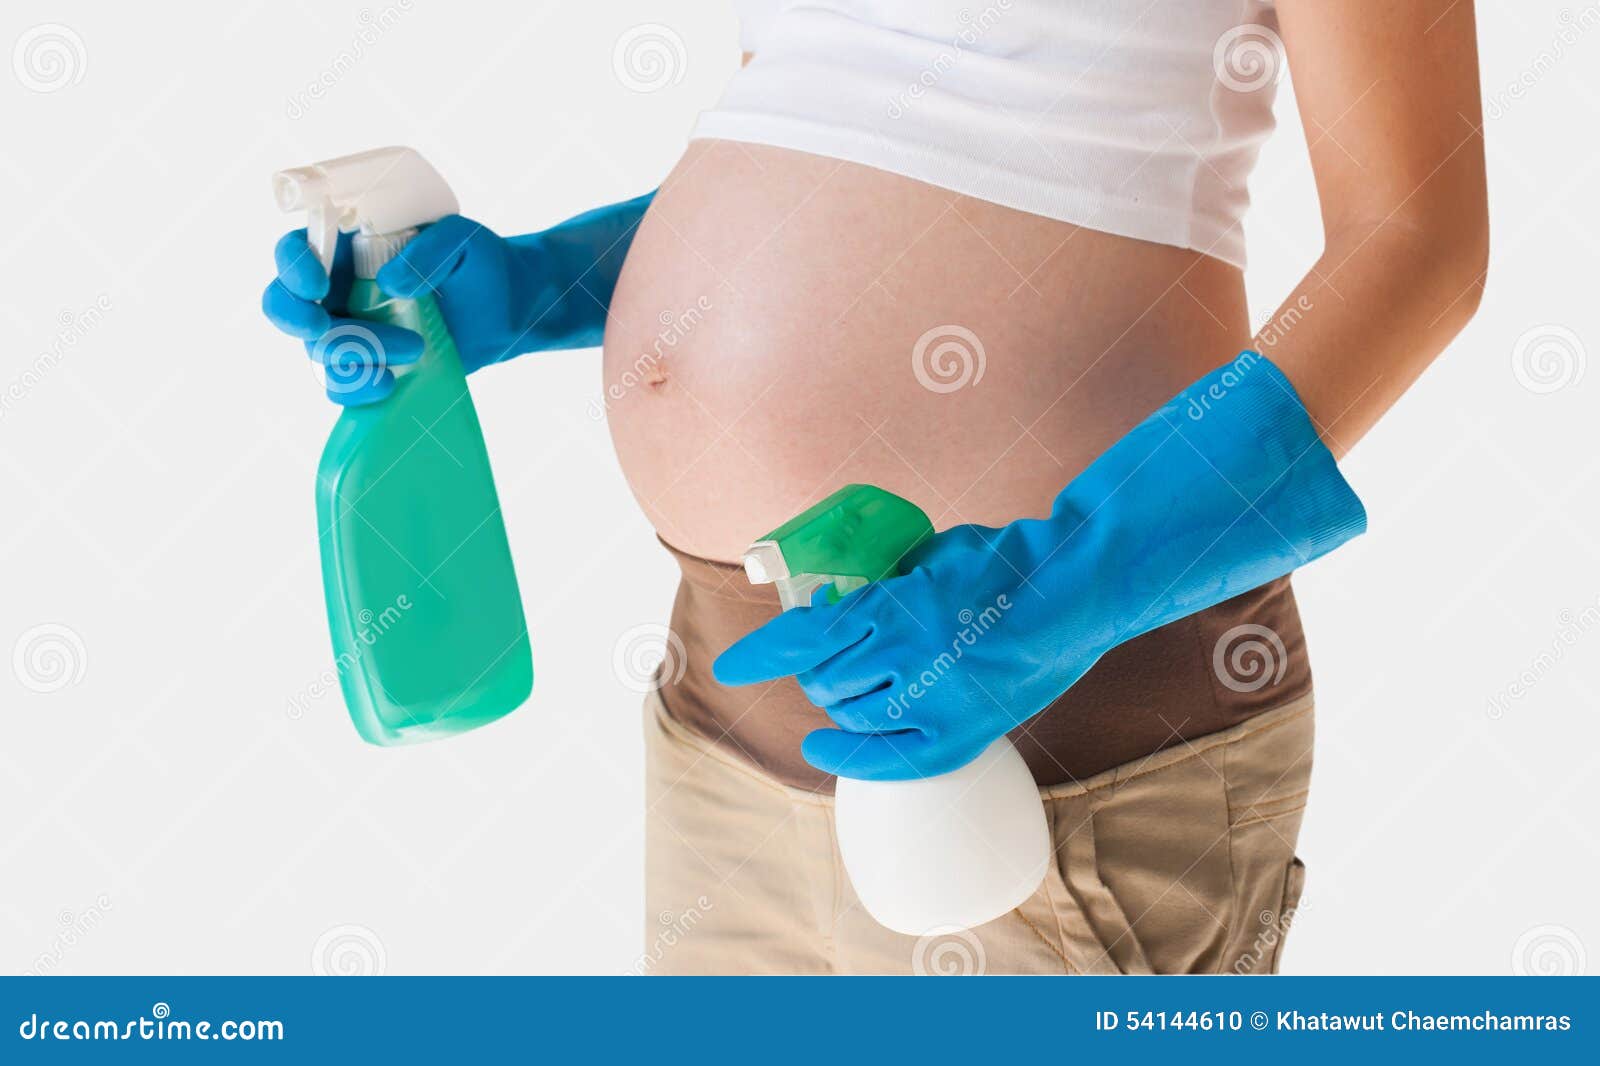 Cleaning Products While Pregnant 24